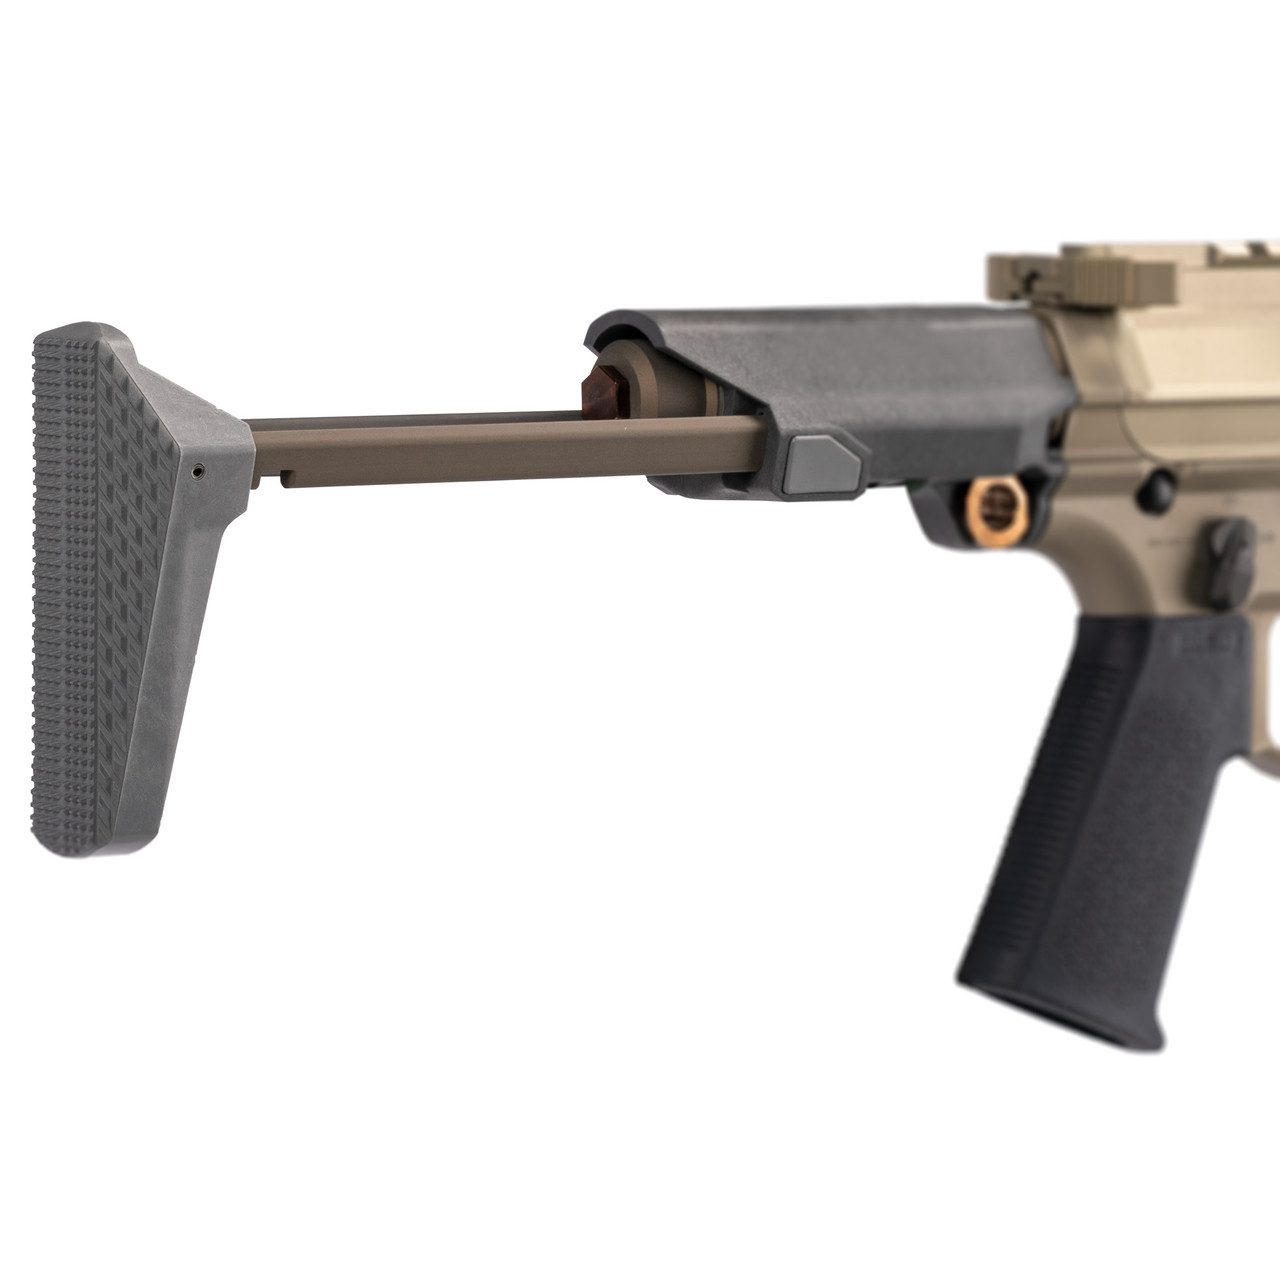 Q ACC-HB-STOCK-ASSEMBLY Honey Badger 2 Position Stk Asmbly